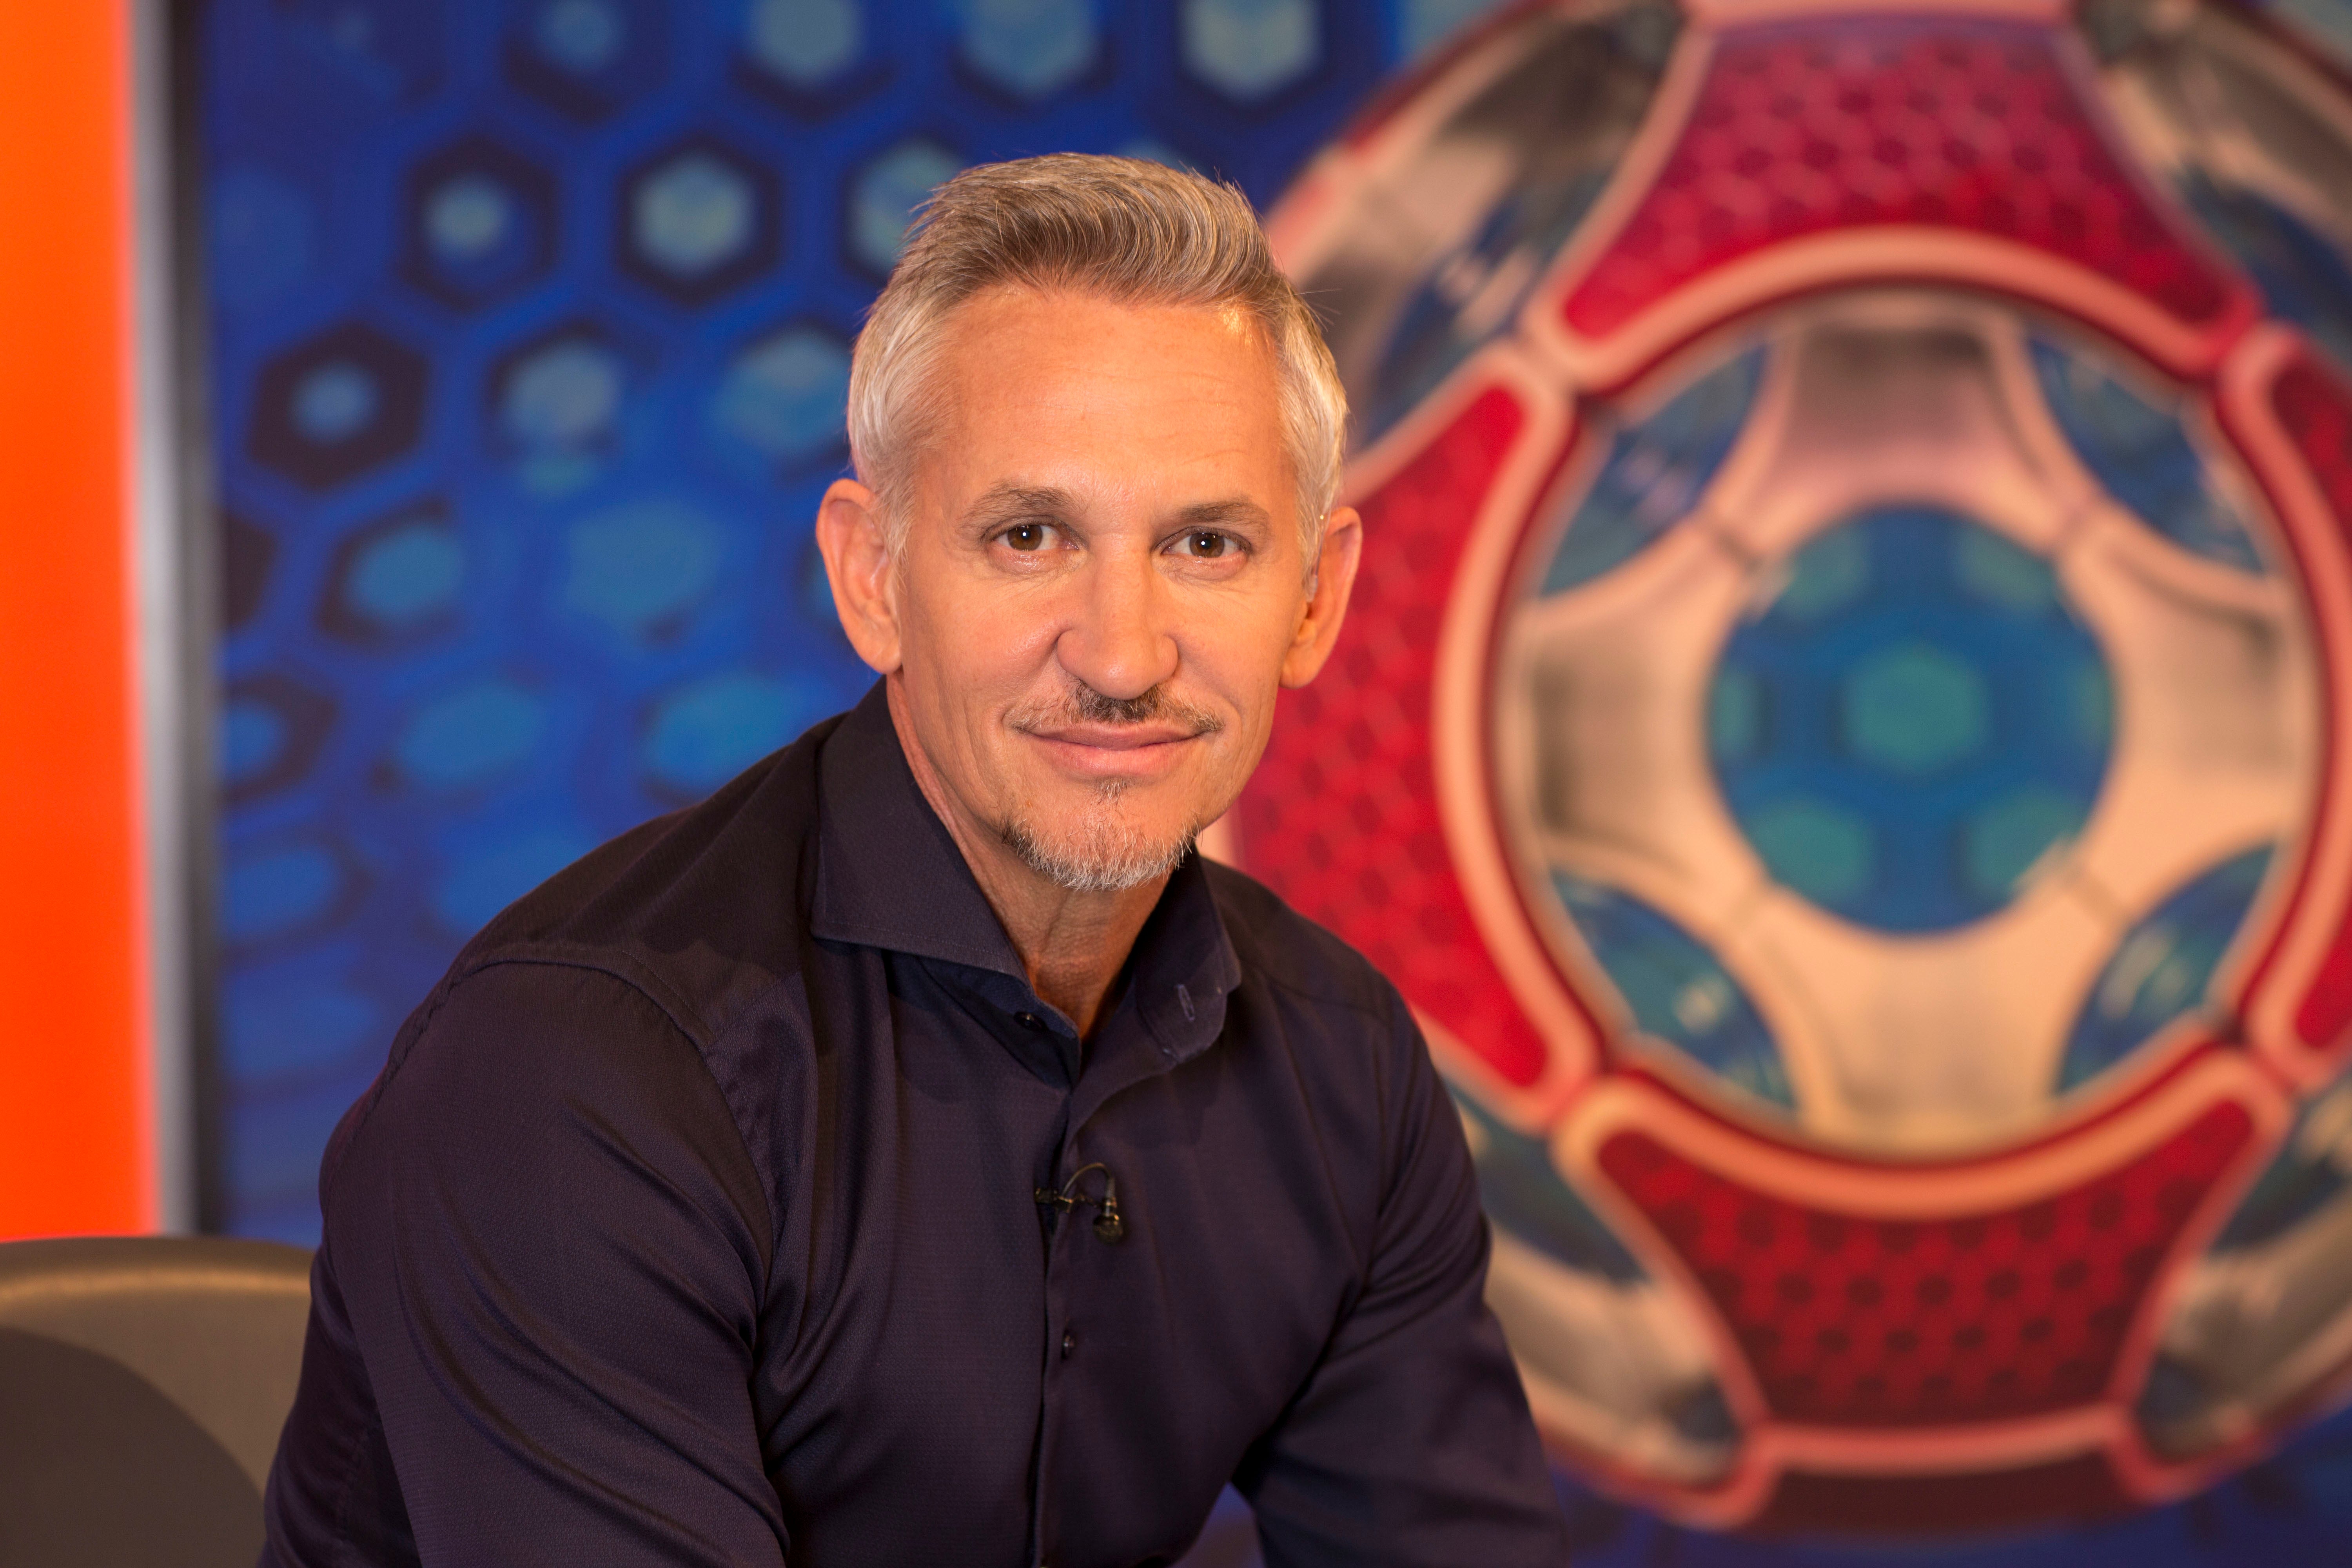 Lineker presenting ‘Match of the Day'